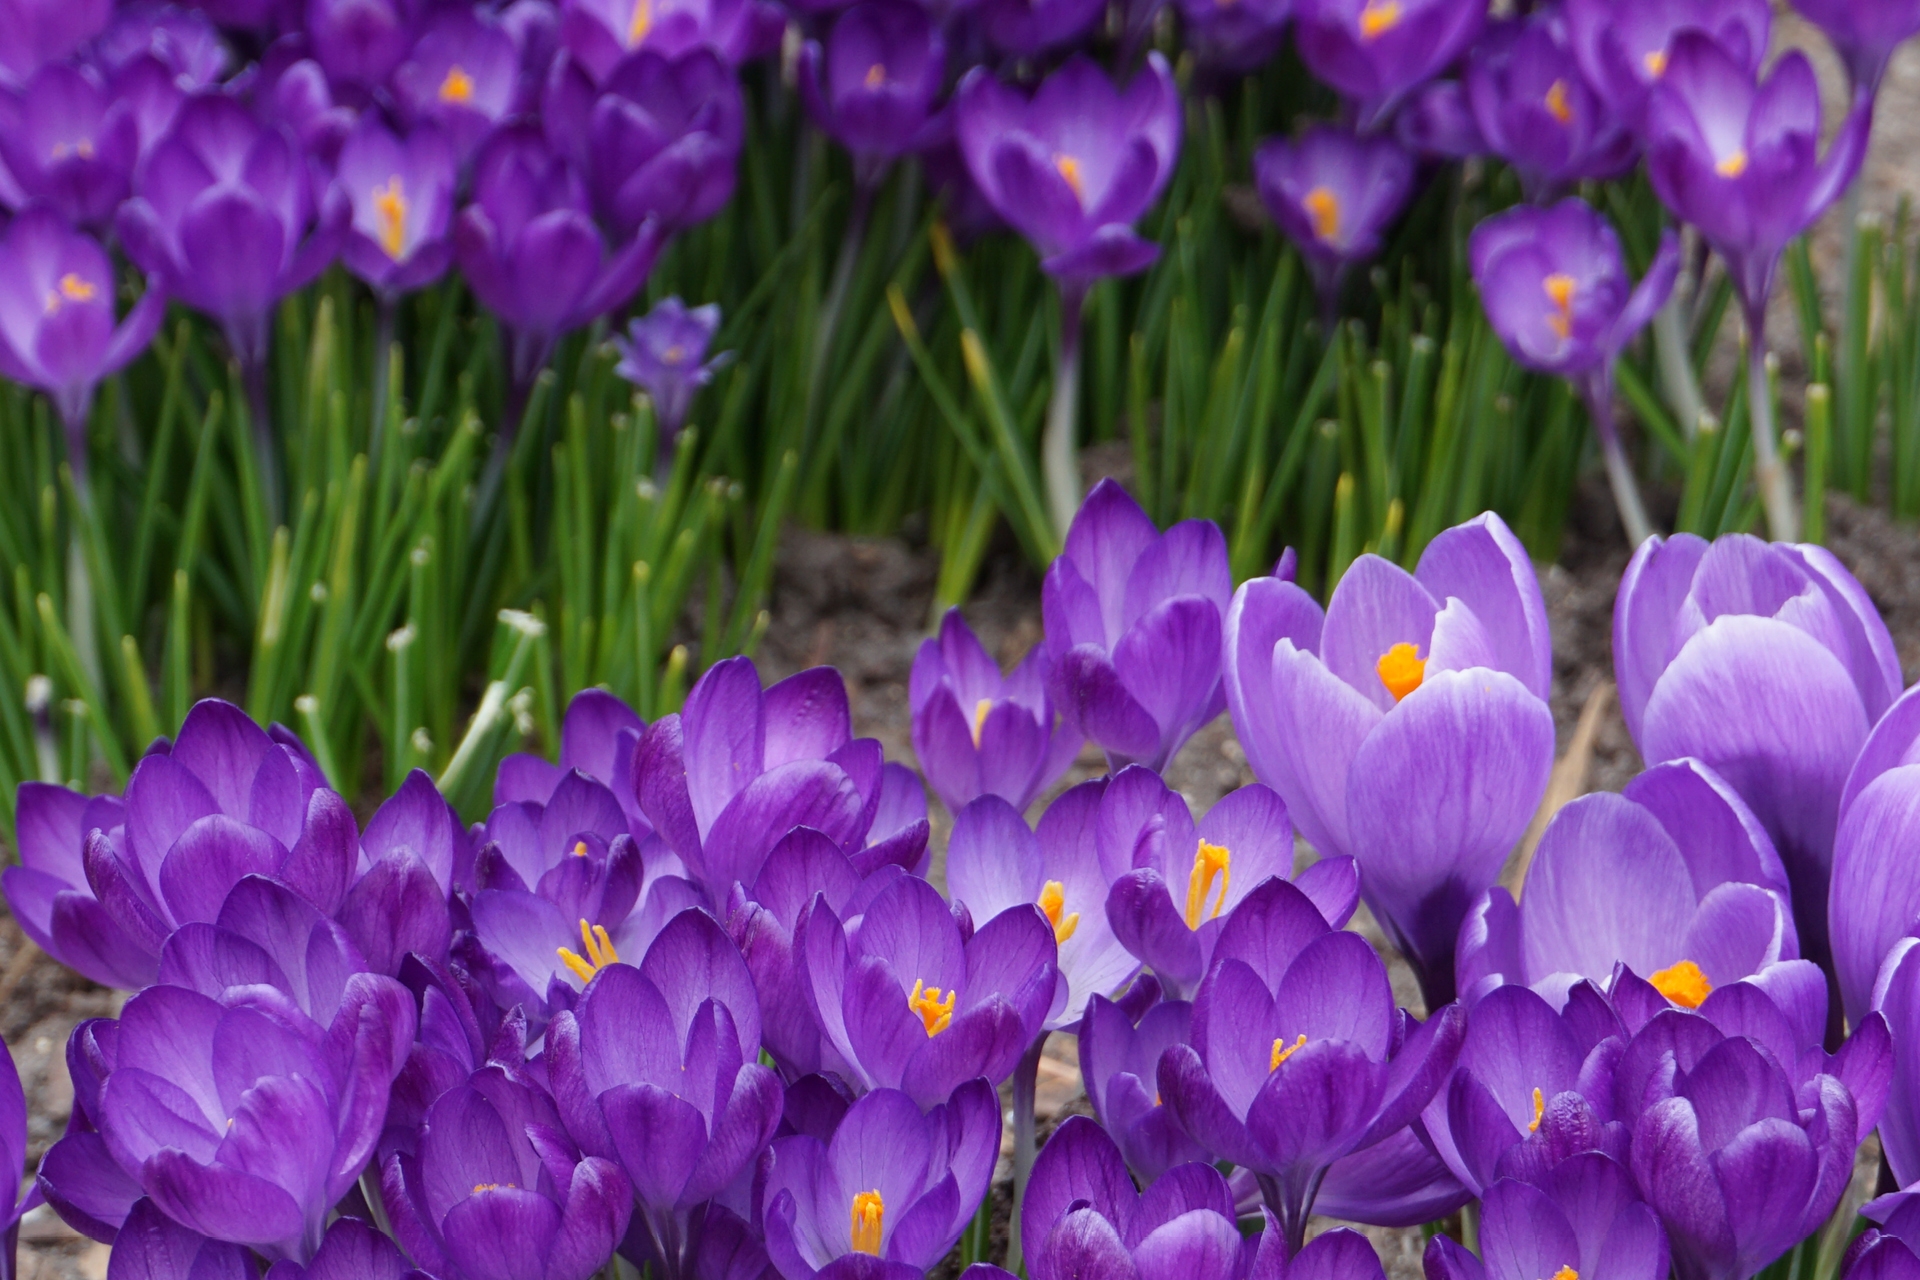 A bed of bright purple spring flowers